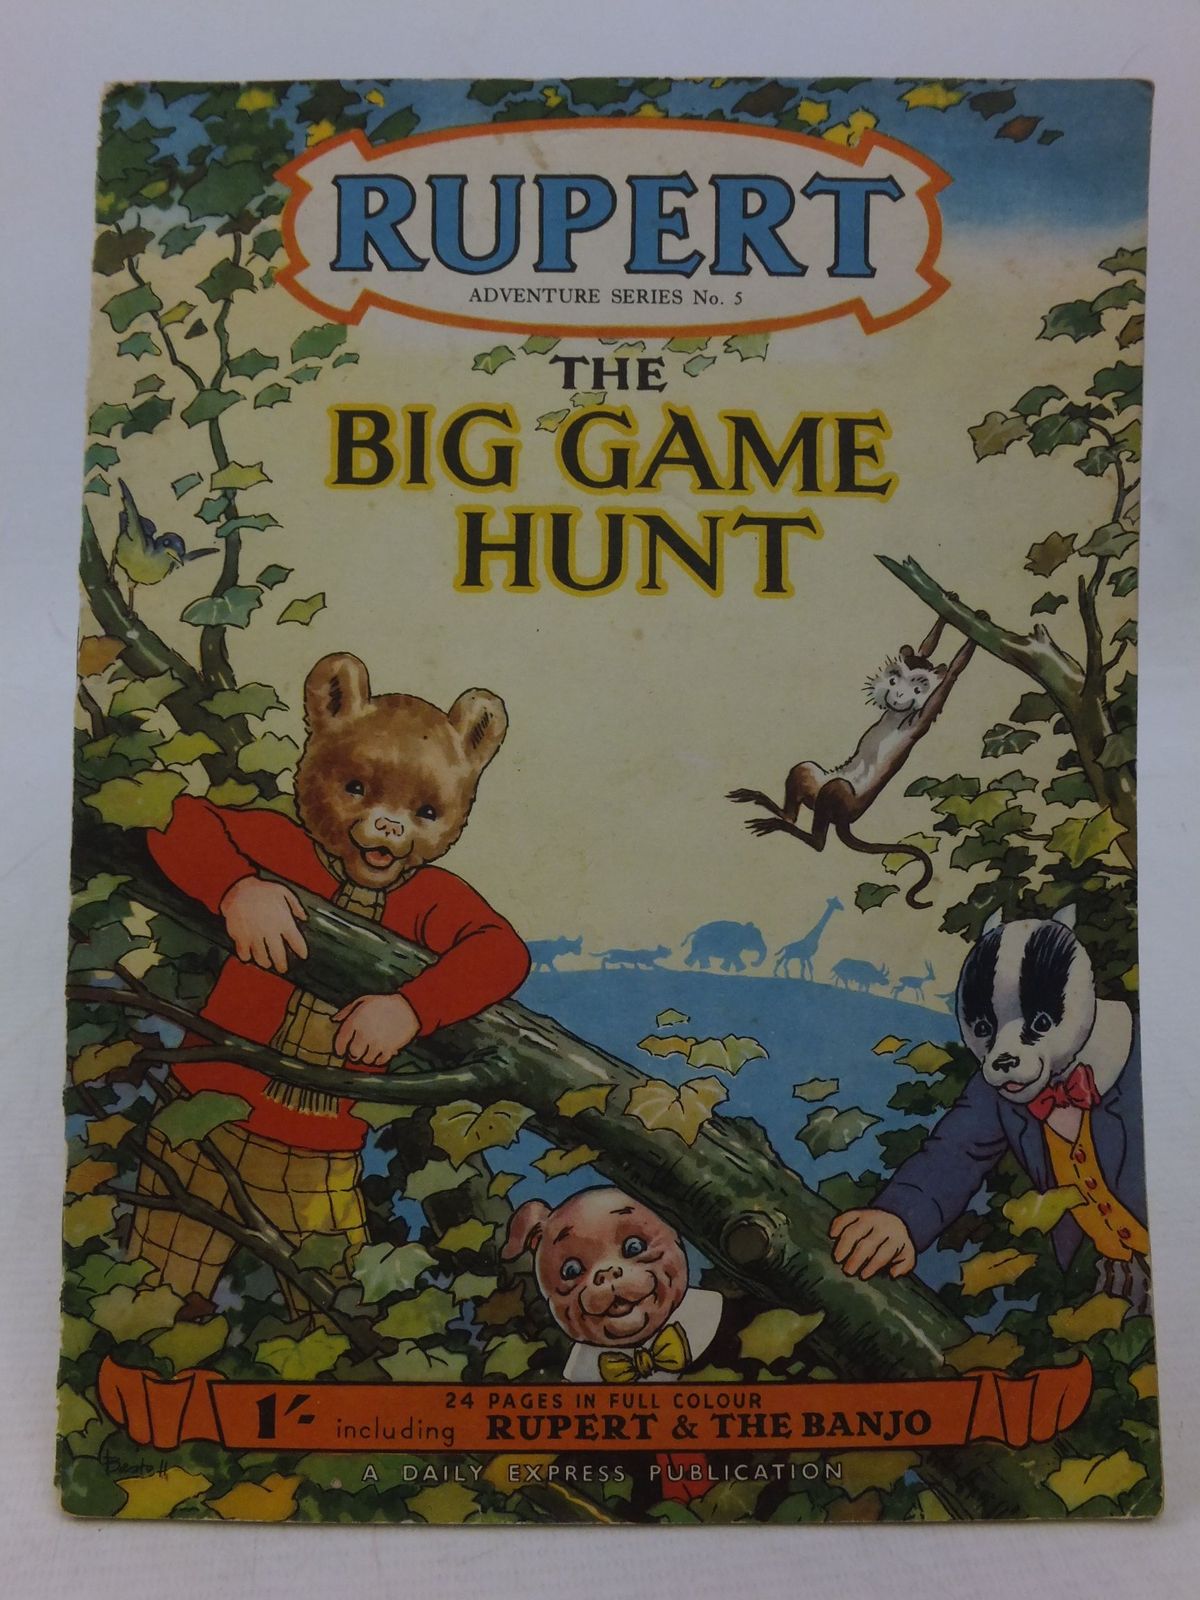 Photo of RUPERT ADVENTURE SERIES No. 5 - THE BIG GAME HUNT written by Bestall, Alfred illustrated by Bestall, Alfred published by Daily Express (STOCK CODE: 1109183)  for sale by Stella & Rose's Books